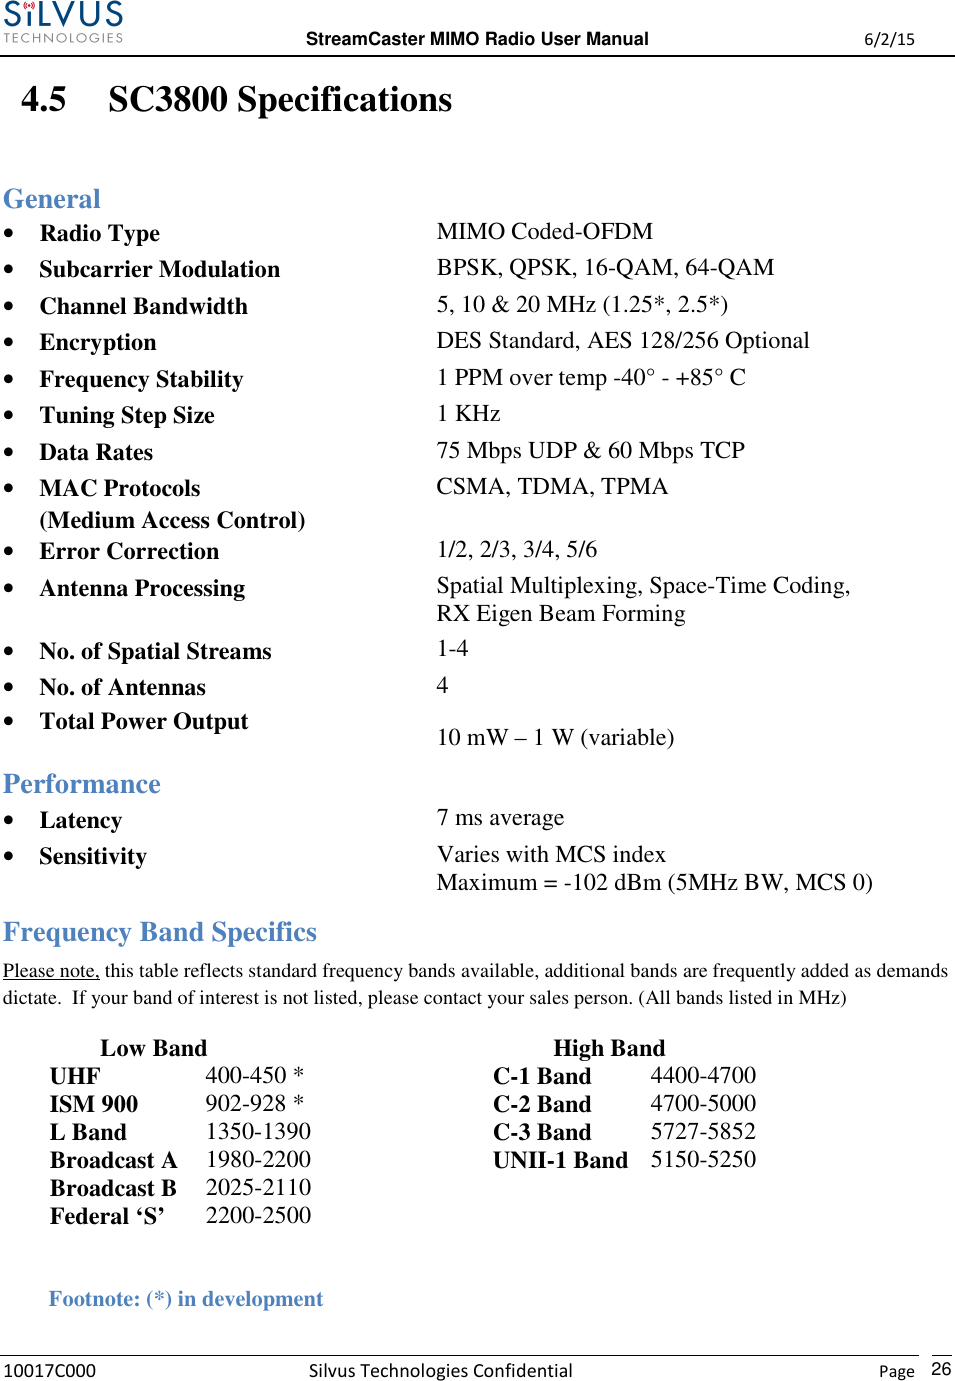  StreamCaster MIMO Radio User Manual  6/2/15 10017C000 Silvus Technologies Confidential    Page   26 4.5 SC3800 Specifications General • Radio Type  MIMO Coded-OFDM • Subcarrier Modulation  BPSK, QPSK, 16-QAM, 64-QAM • Channel Bandwidth  5, 10 &amp; 20 MHz (1.25*, 2.5*) • Encryption  DES Standard, AES 128/256 Optional • Frequency Stability  1 PPM over temp -40° - +85° C • Tuning Step Size  1 KHz • Data Rates  75 Mbps UDP &amp; 60 Mbps TCP • MAC Protocols (Medium Access Control) CSMA, TDMA, TPMA • Error Correction  1/2, 2/3, 3/4, 5/6 • Antenna Processing  Spatial Multiplexing, Space-Time Coding, RX Eigen Beam Forming • No. of Spatial Streams  1-4 • No. of Antennas • Total Power Output 4 10 mW – 1 W (variable) Performance • Latency  7 ms average • Sensitivity  Varies with MCS index Maximum = -102 dBm (5MHz BW, MCS 0) Frequency Band Specifics Please note, this table reflects standard frequency bands available, additional bands are frequently added as demands dictate.  If your band of interest is not listed, please contact your sales person. (All bands listed in MHz)                  Low Band                   High Band   UHF  400-450 *    C-1 Band  4400-4700    ISM 900  902-928 *    C-2 Band  4700-5000   L Band  1350-1390    C-3 Band  5727-5852    Broadcast A  1980-2200    UNII-1 Band 5150-5250   Broadcast B  2025-2110         Federal ‘S’  2200-2500                       Footnote: (*) in development      